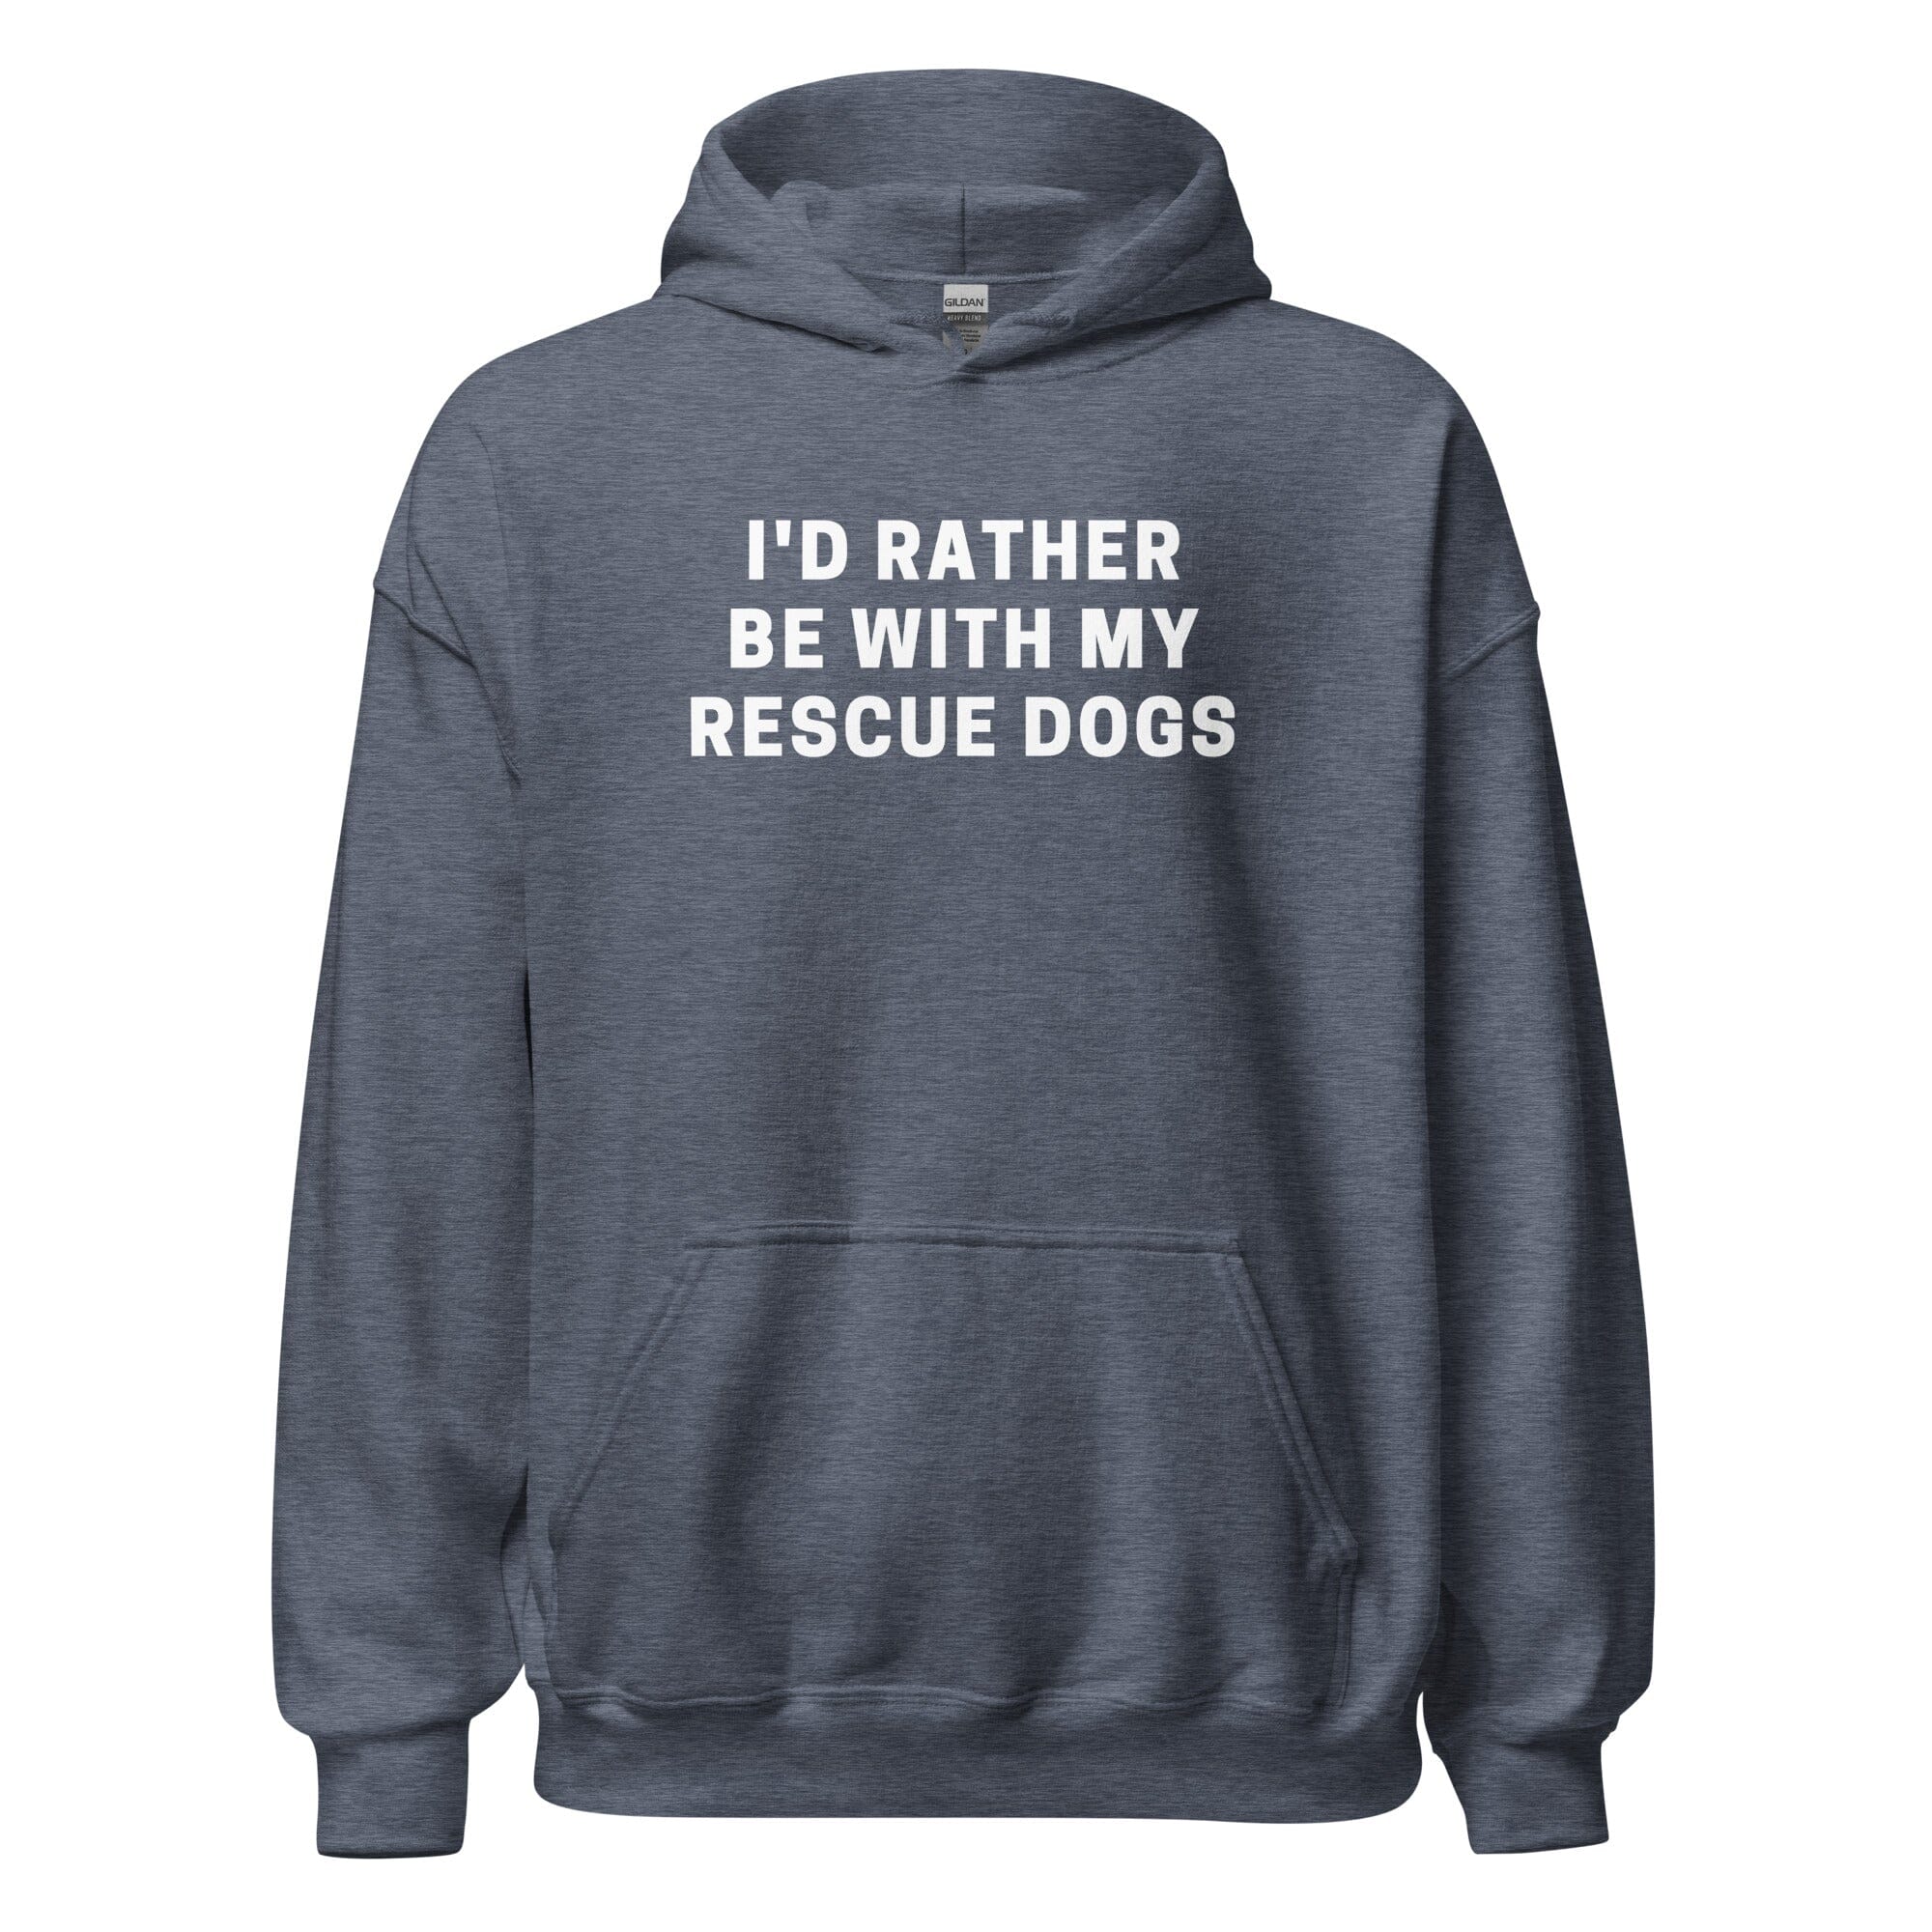 I'd Rather Be With My Rescue Dogs Uni Hoodie (Tails of Rescue in Kahoots)